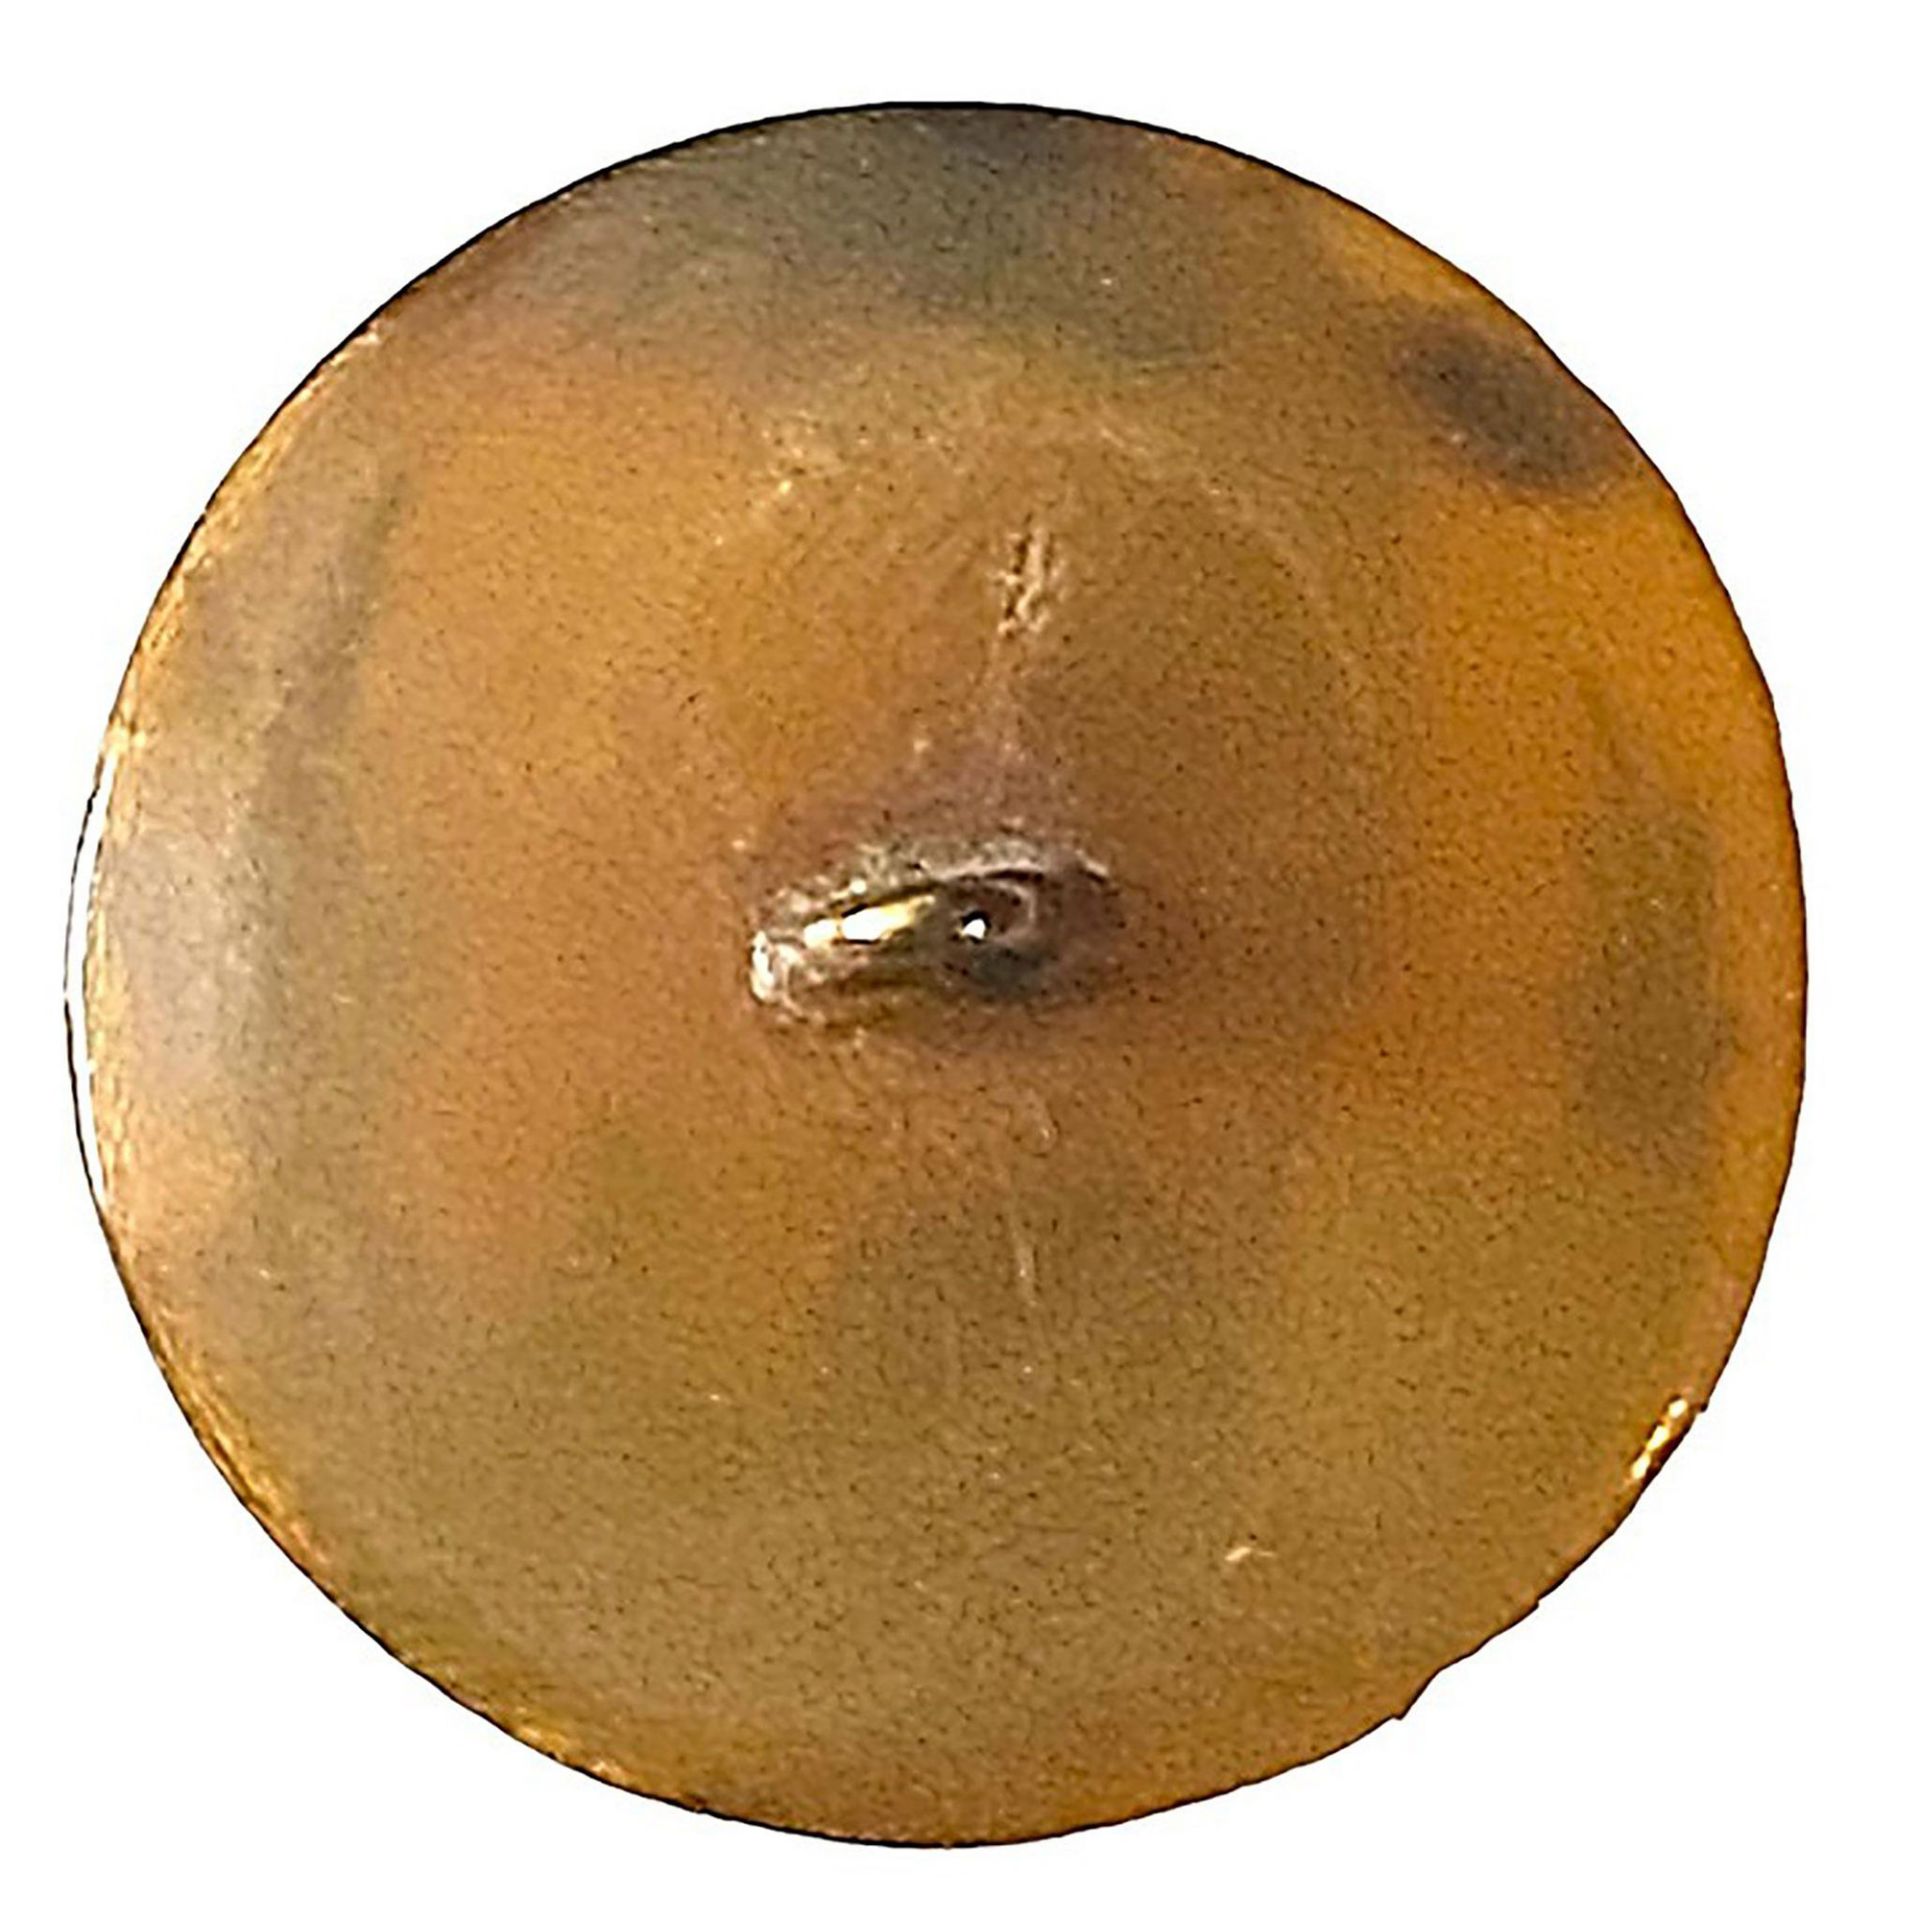 A division one inlaid natural horn pictorial button - Image 2 of 2